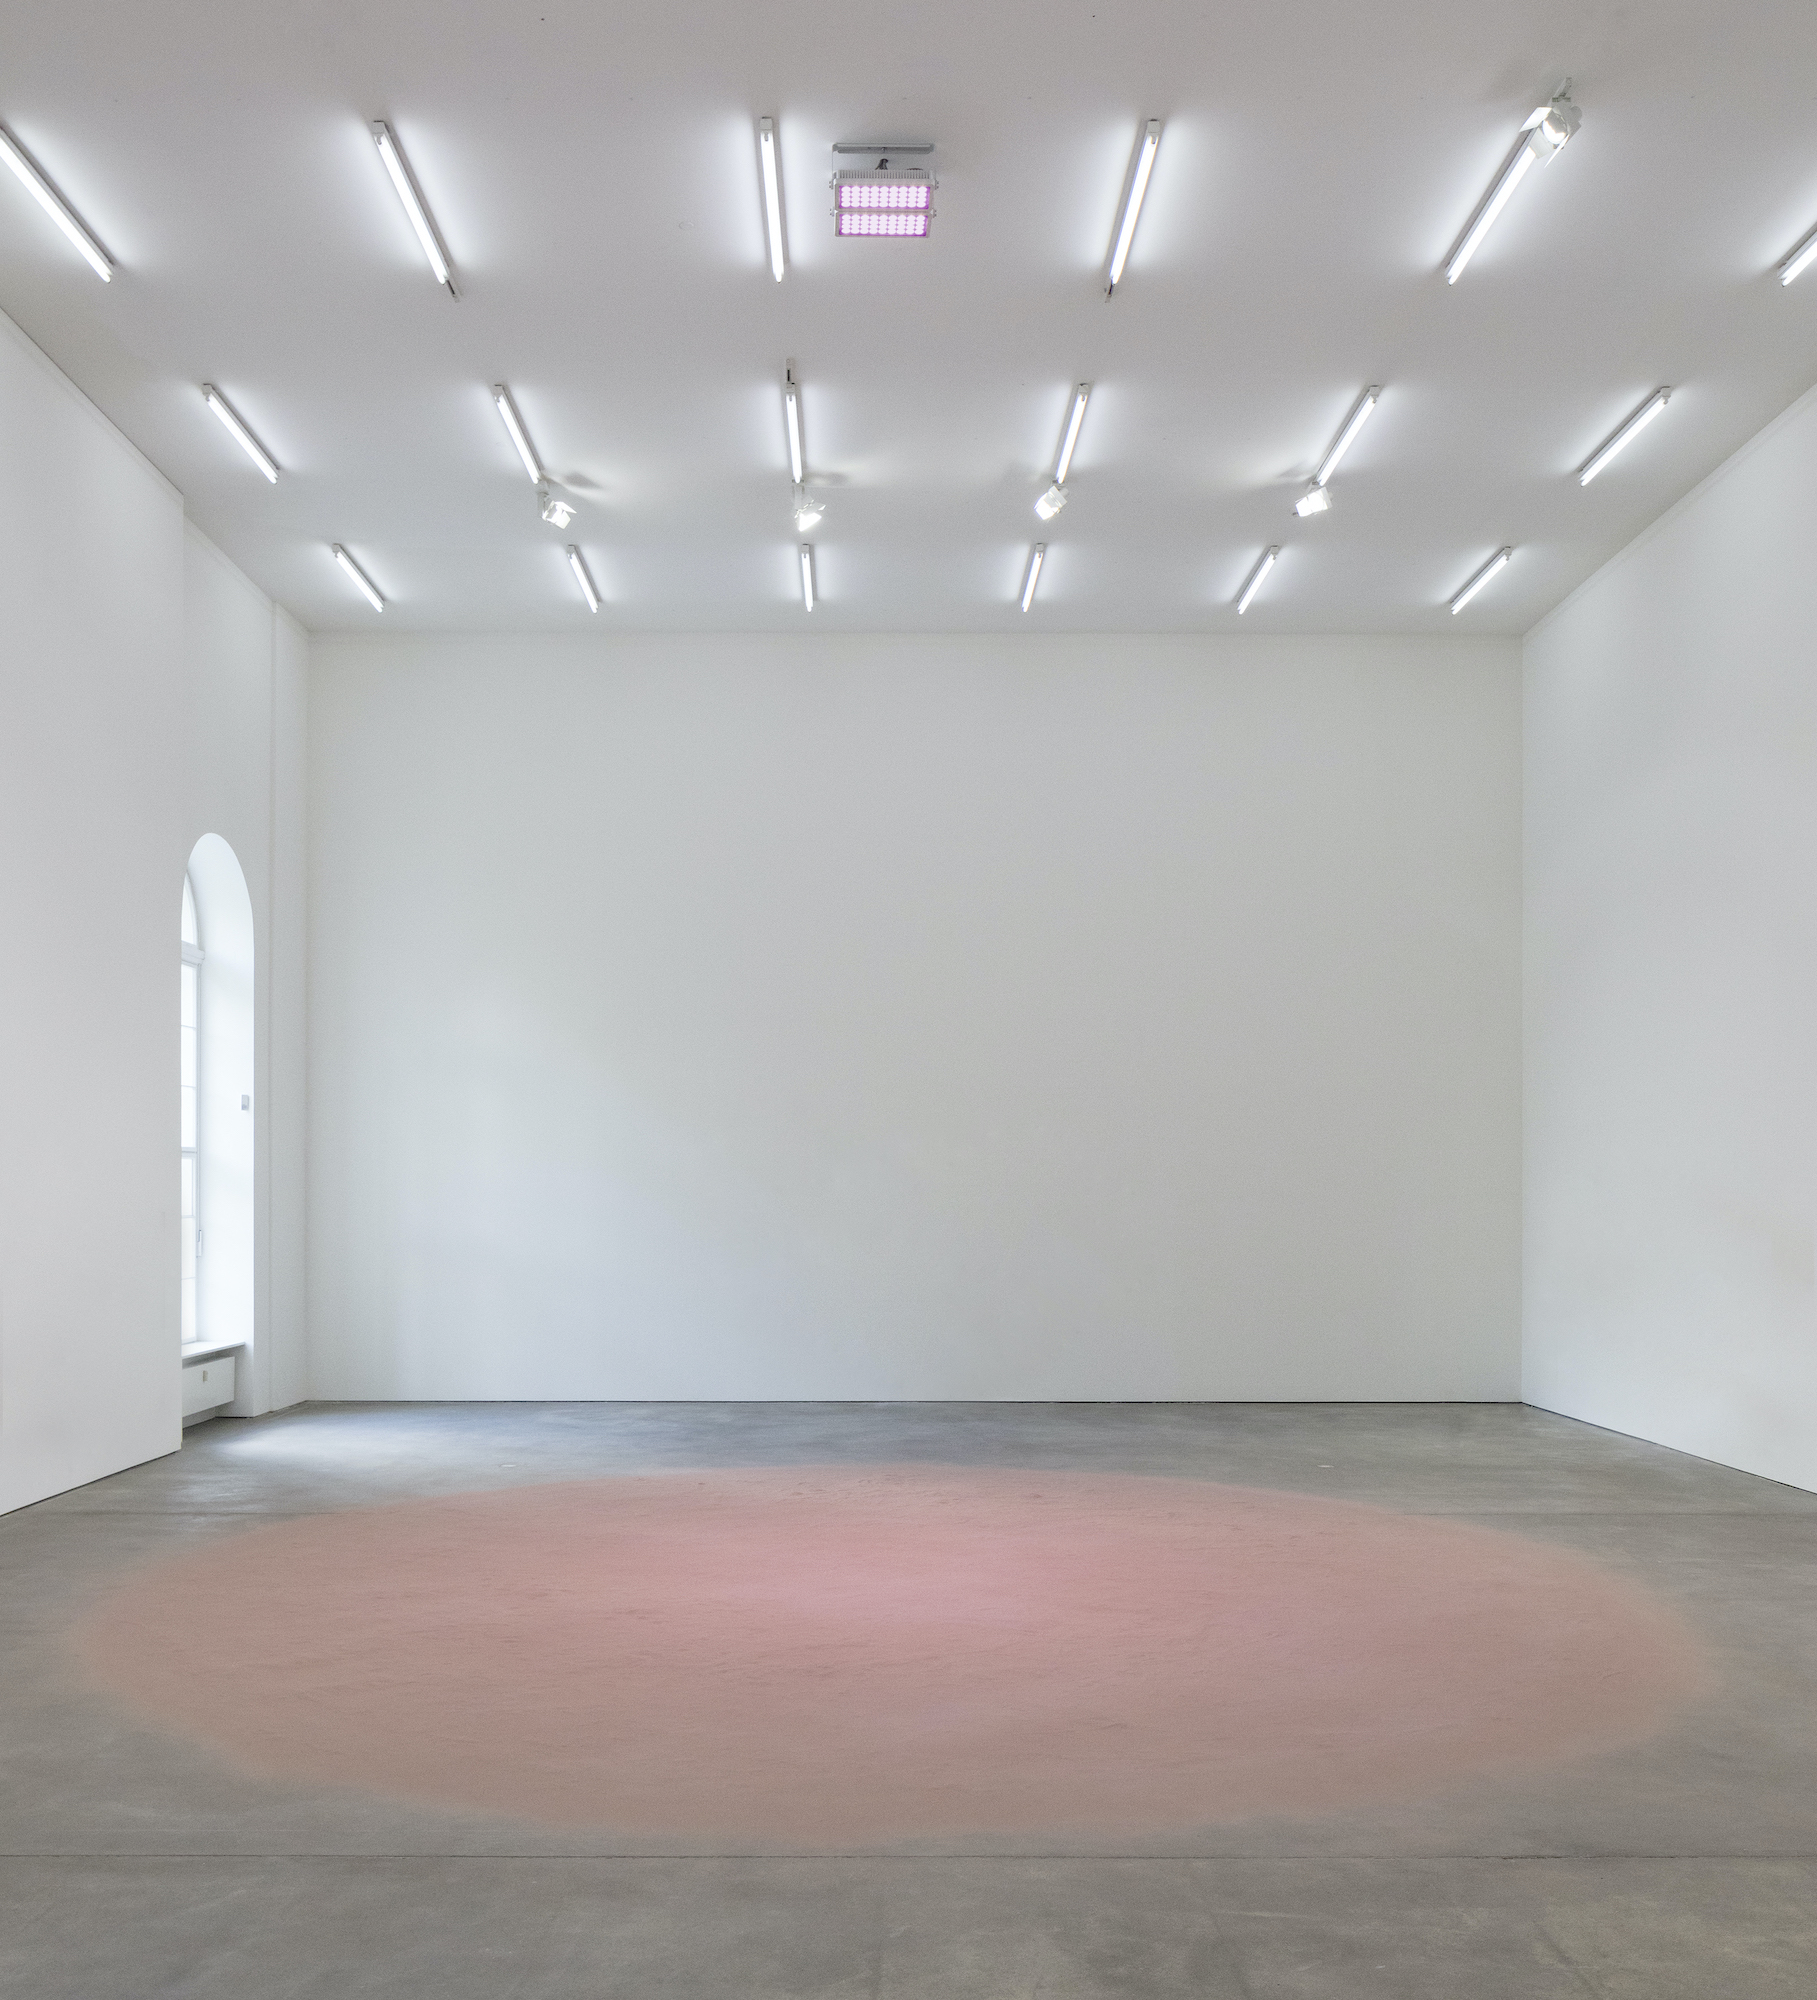 A large circle of pink sand is spread on the floor with blank gallery walls.